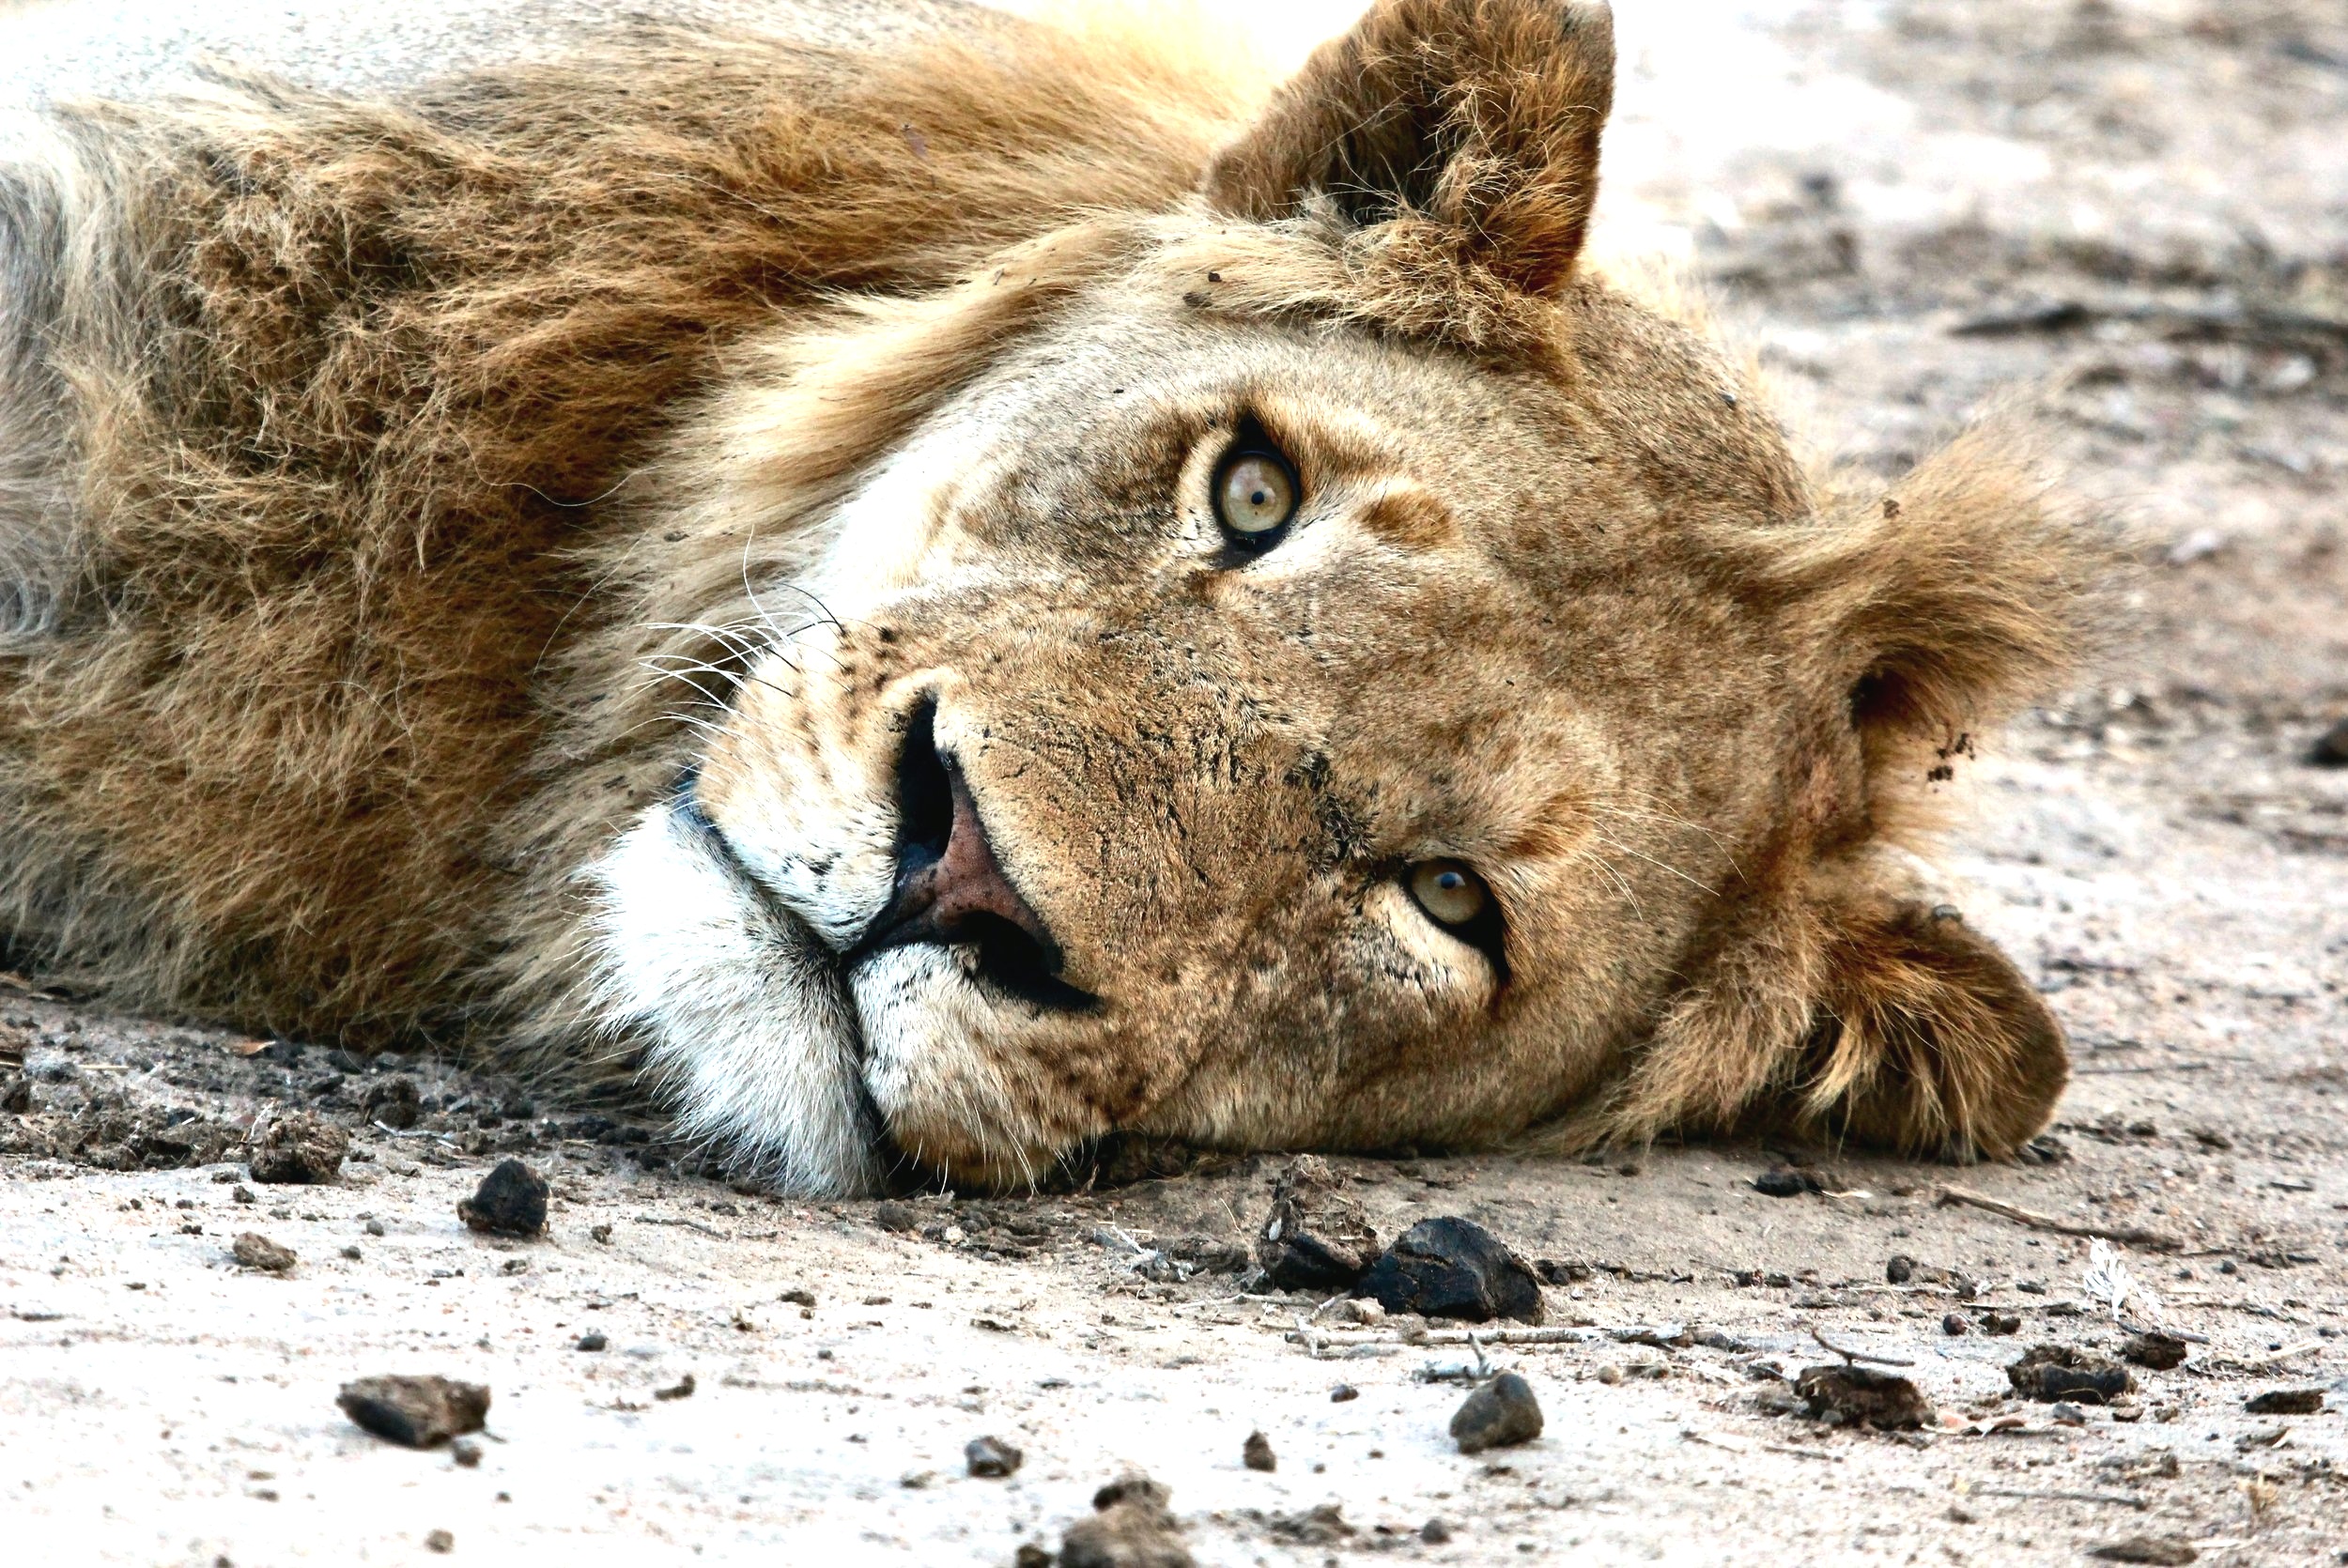 Male lion in the Kruger National Park, South Africa